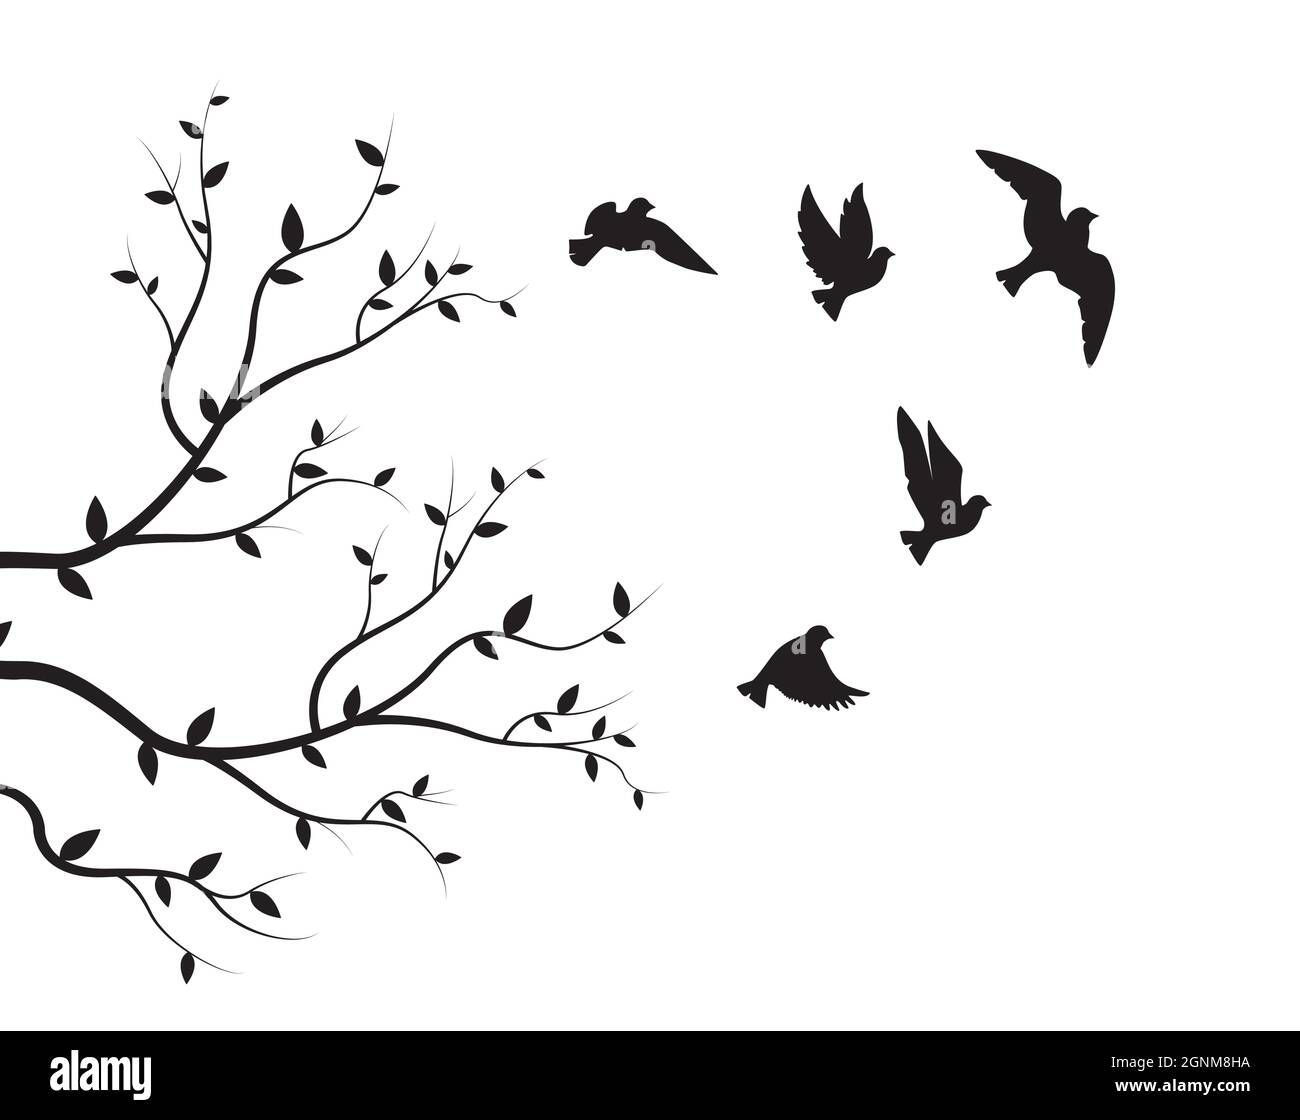 Flying Birds Silhouettes And Branch Illustration Isolated On White  Background, Vector. Natural Wall Decals, Wall Art, Artwork (View 10 of 20)